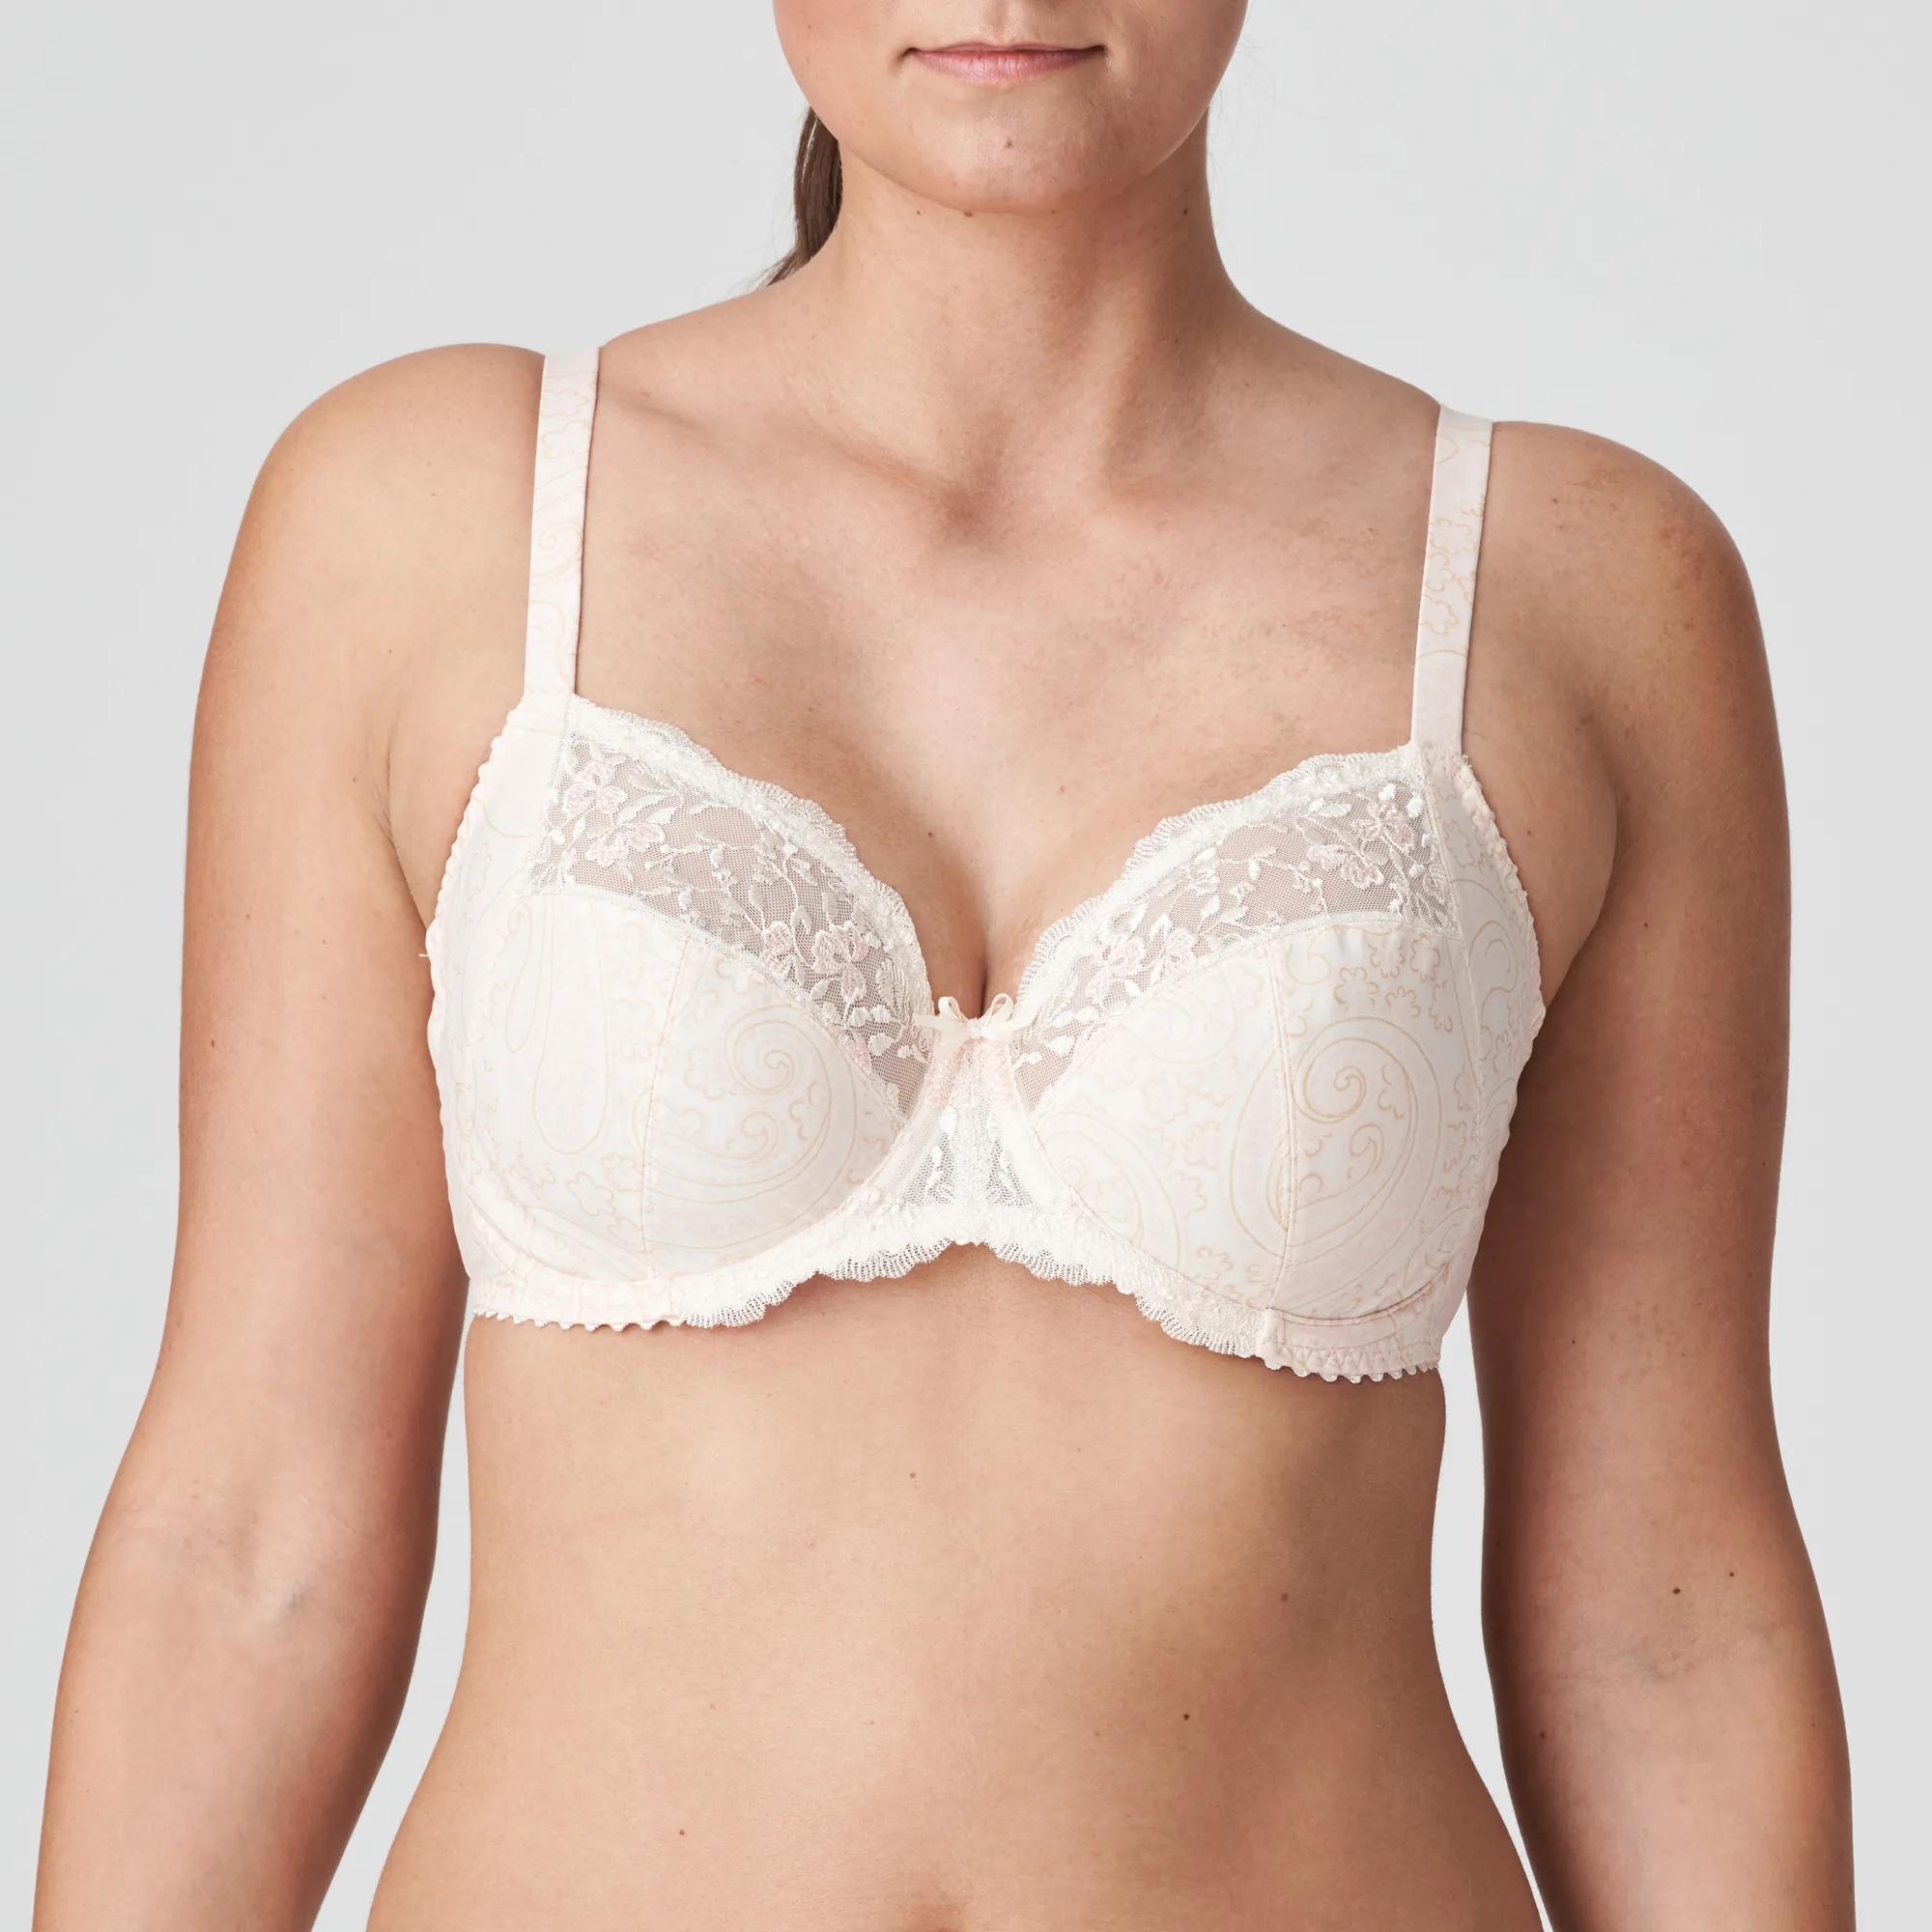 Full Cup Bras - Fantasie, Elomi, Wacoal – Tagged size-34ff